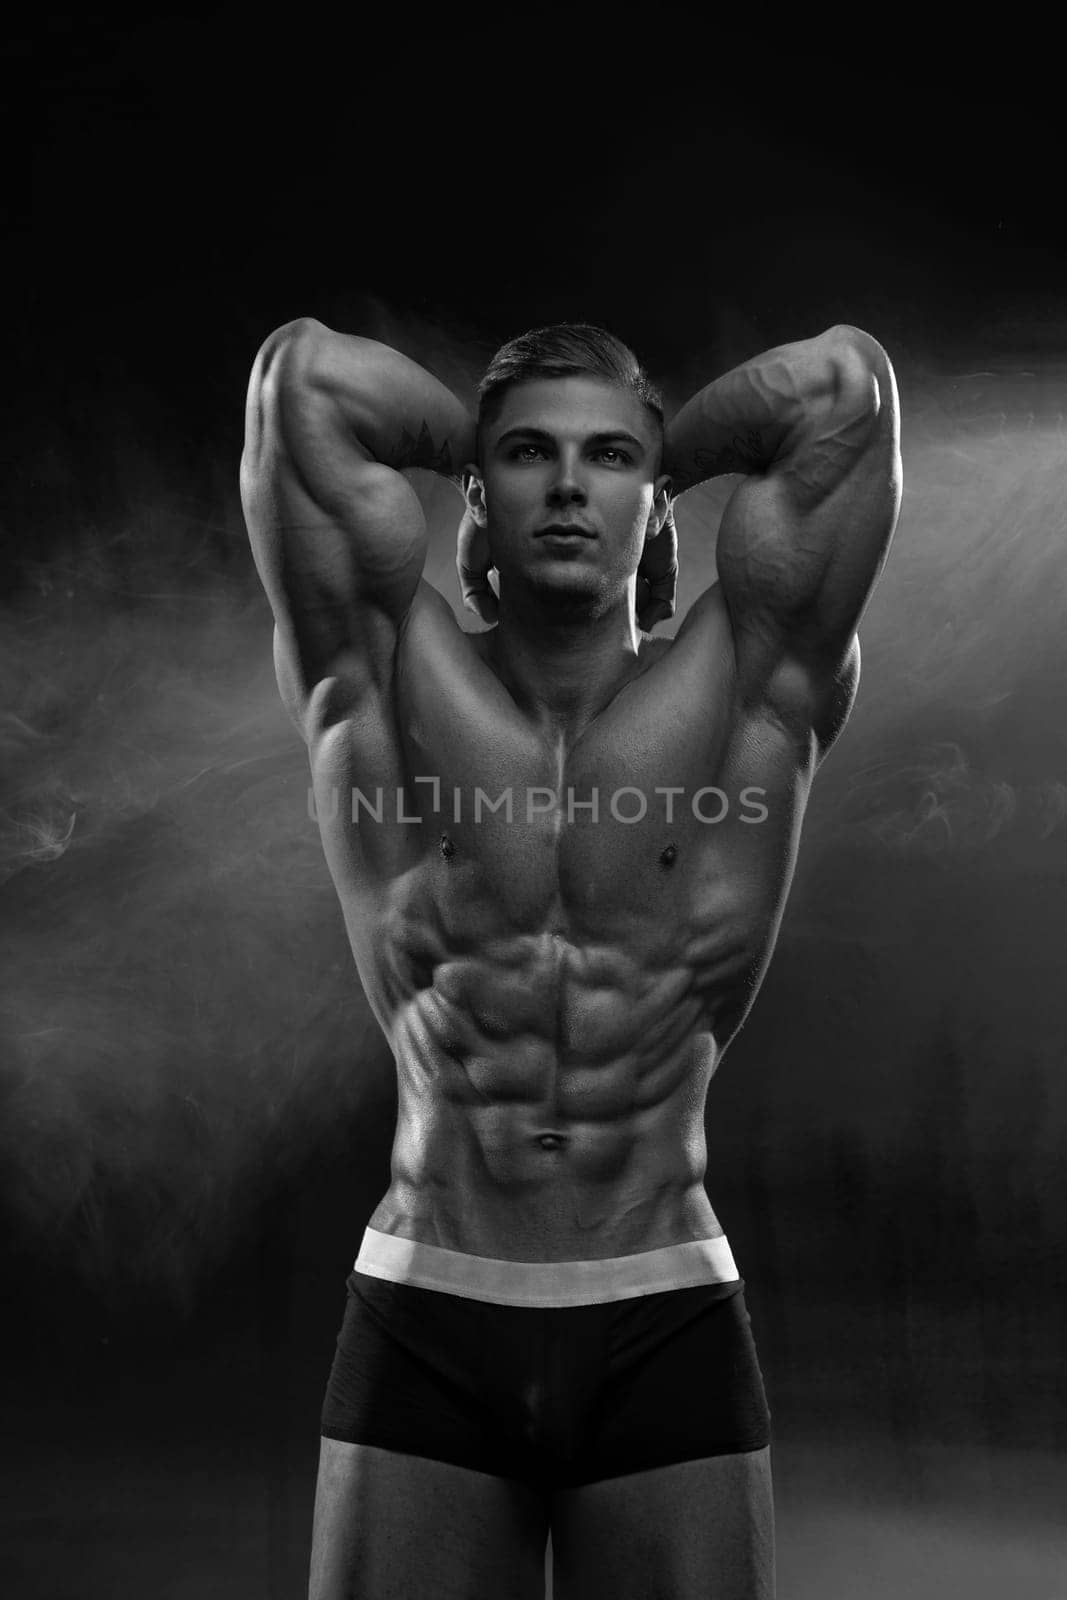 Bodybuilder adult muscular male model posing on empty background in shorts, raising his arms up, demonstrates the latissimus dorsi muscles and perfect abs with low percentage of fat